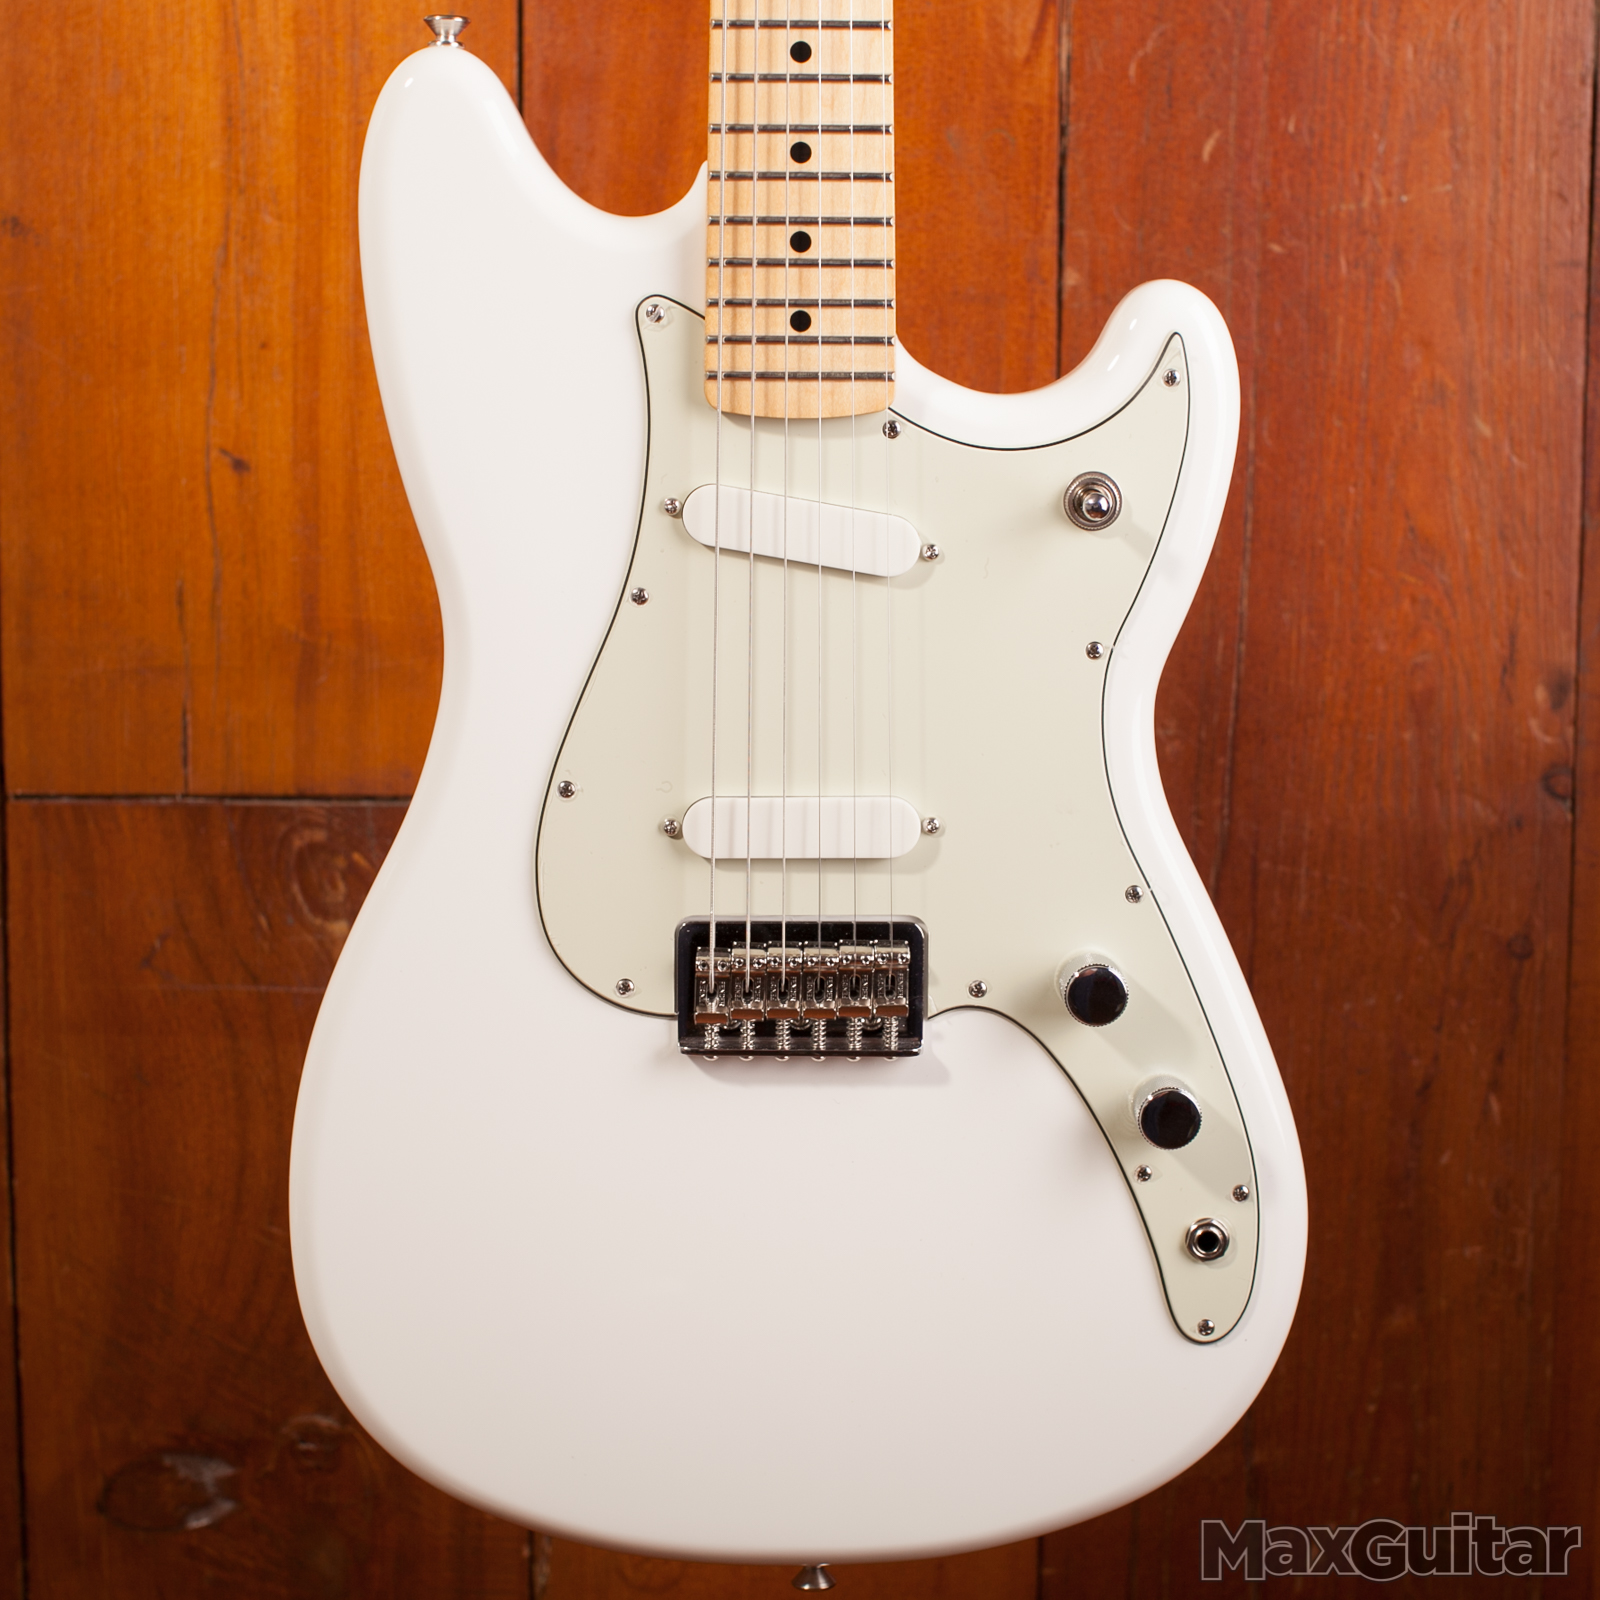 Fender Duo Sonic 2016 White Guitar For Sale Max Guitar